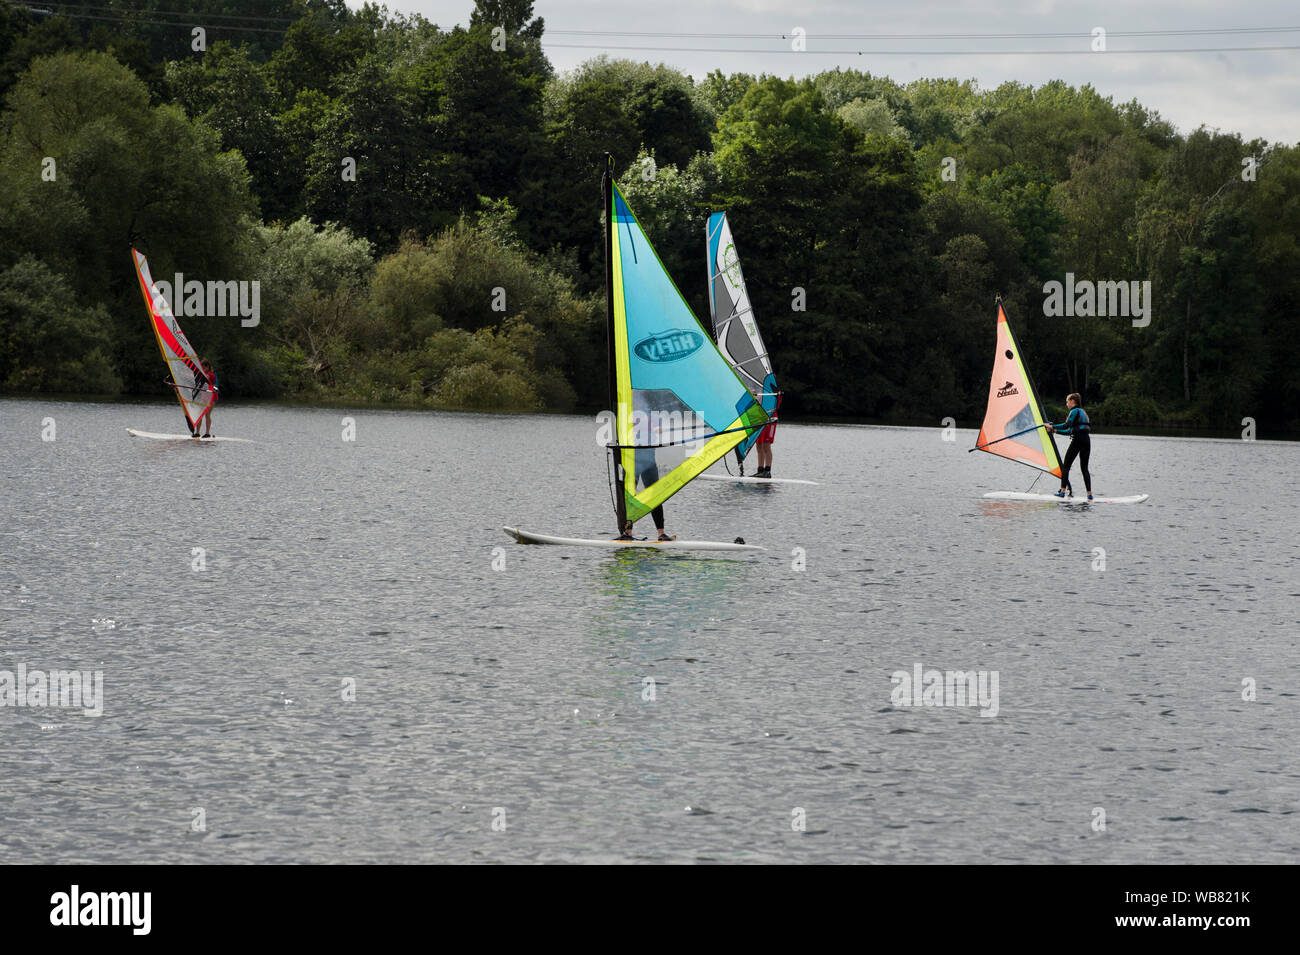 HS2. Colne valley. Harvil Road. Children learn to windsurf. HOAC. Hillingdon Outdoor Activity Centre located in the midst of the proposed HS2 railway Stock Photo